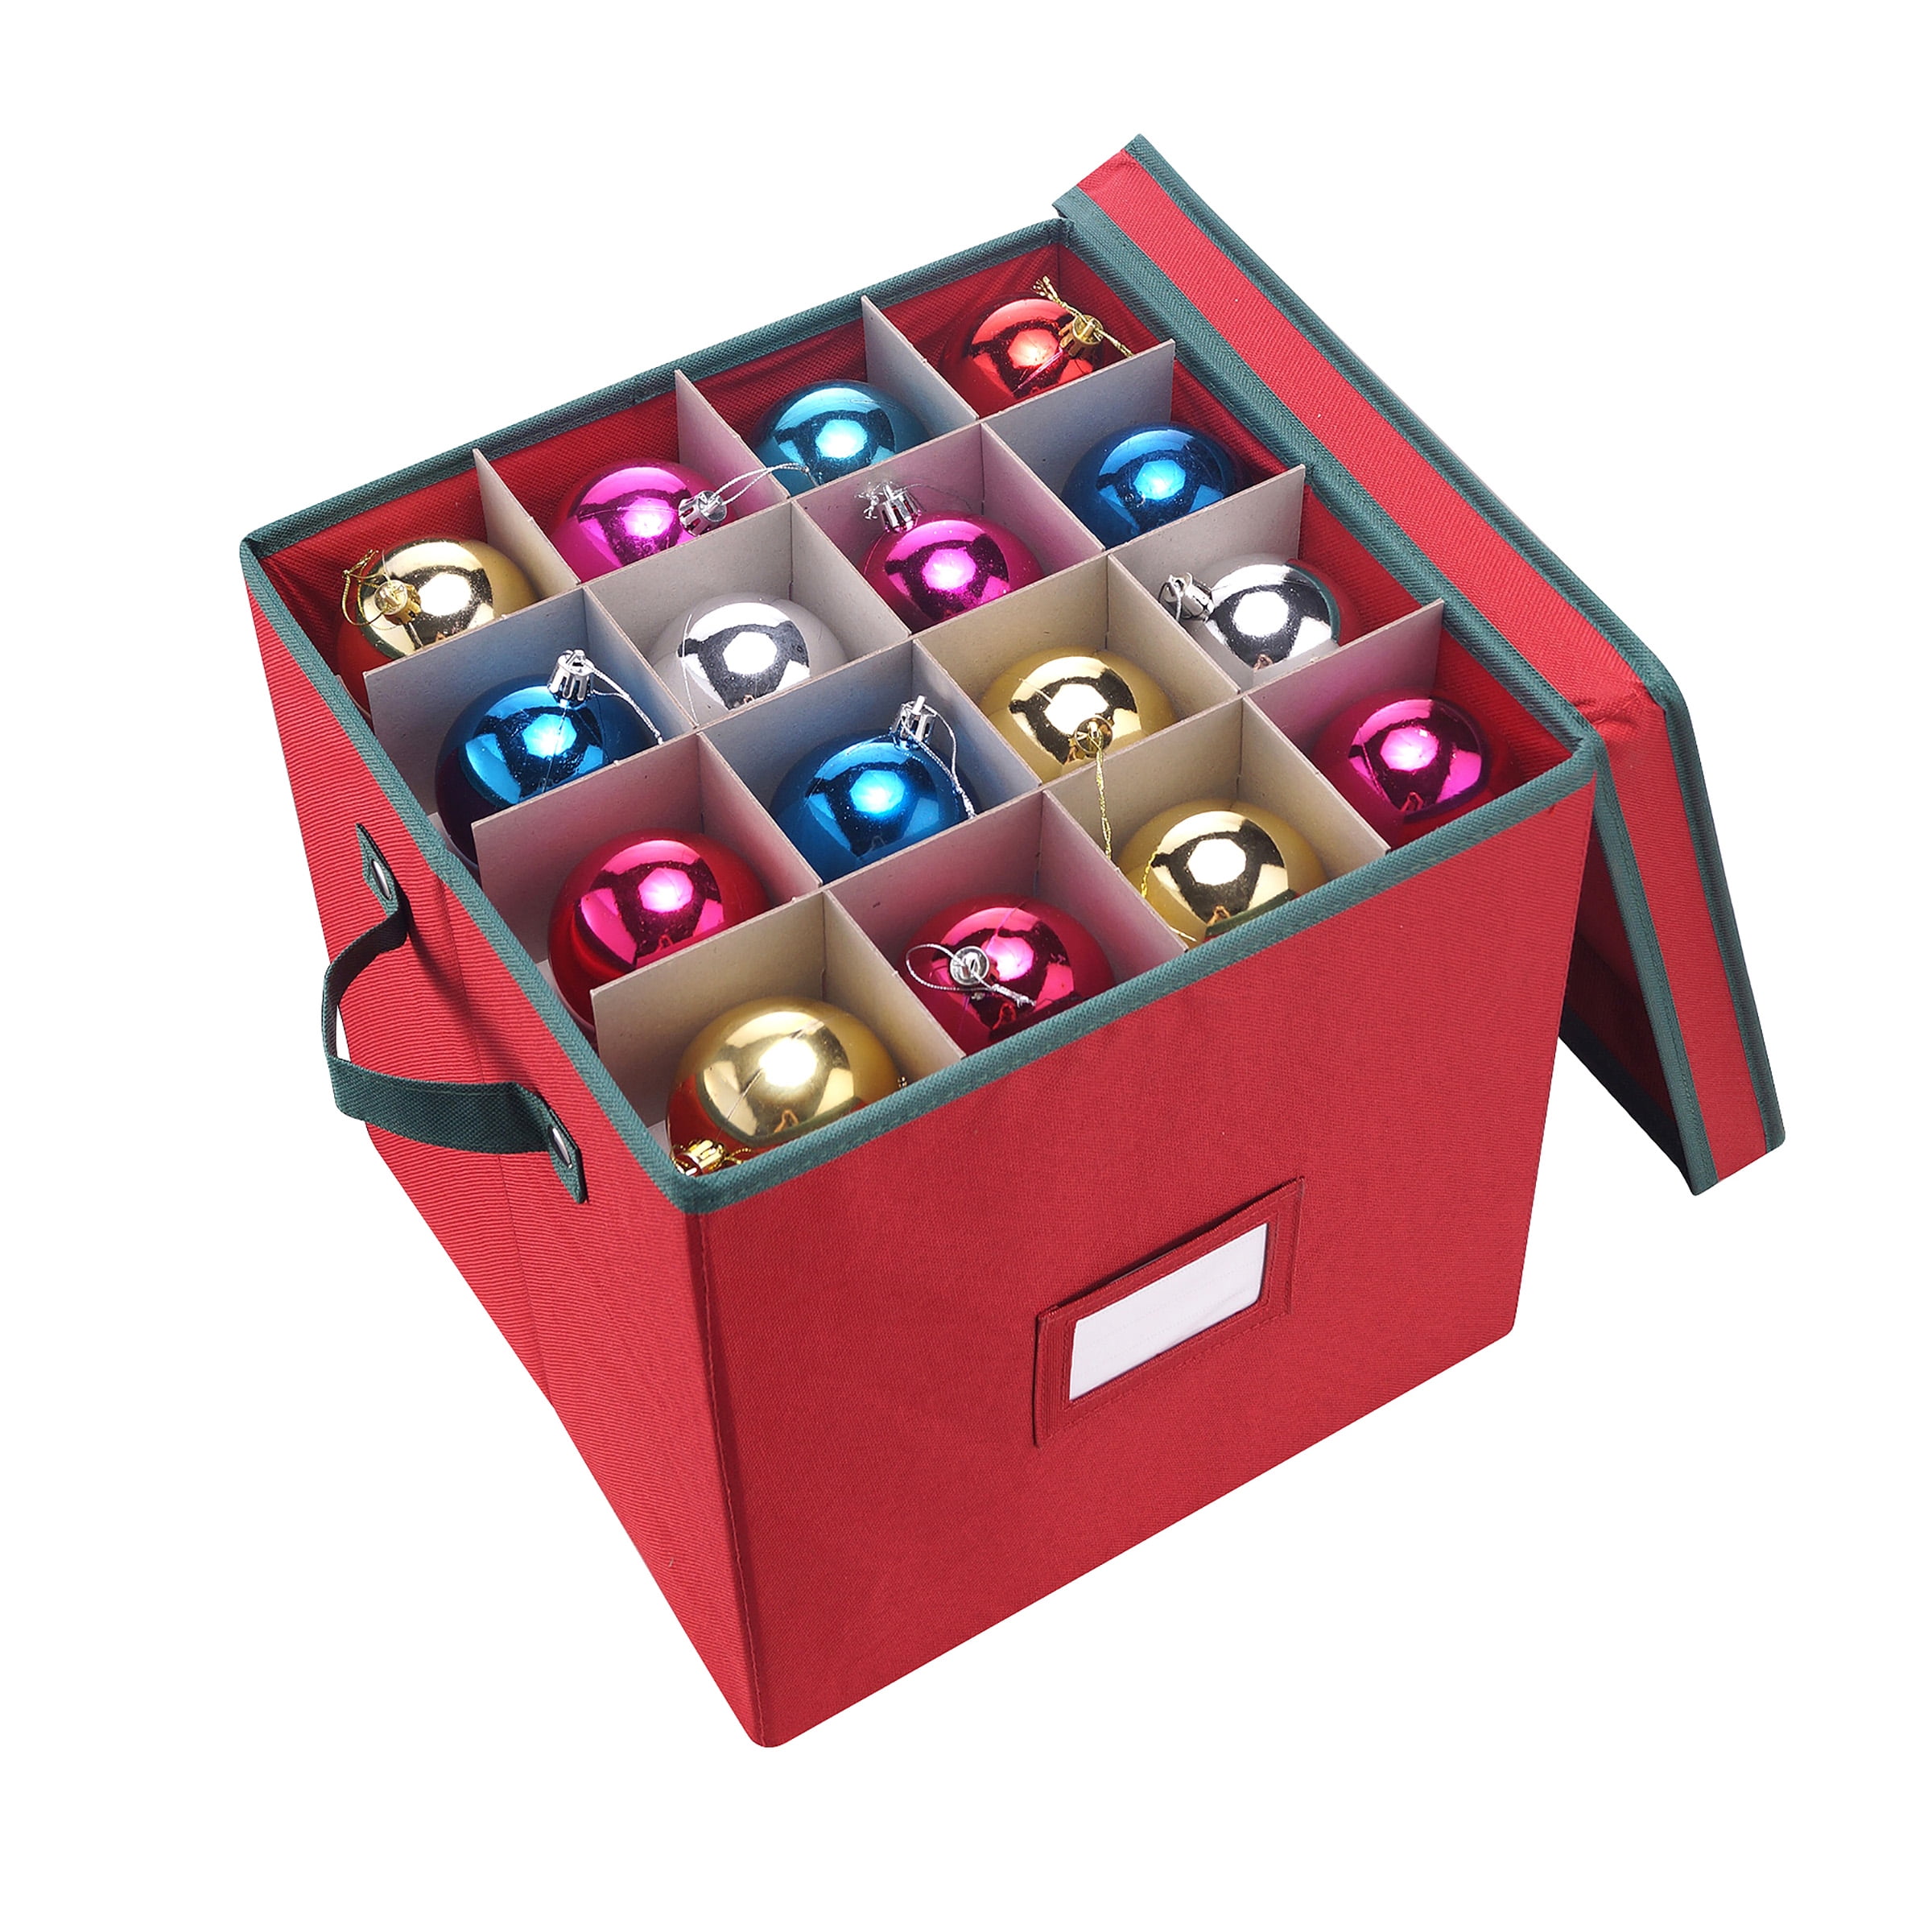 Elf Stor Premium Red Christmas Ornament Storage Chest Holds 64 Balls W/ Dividers for sale online